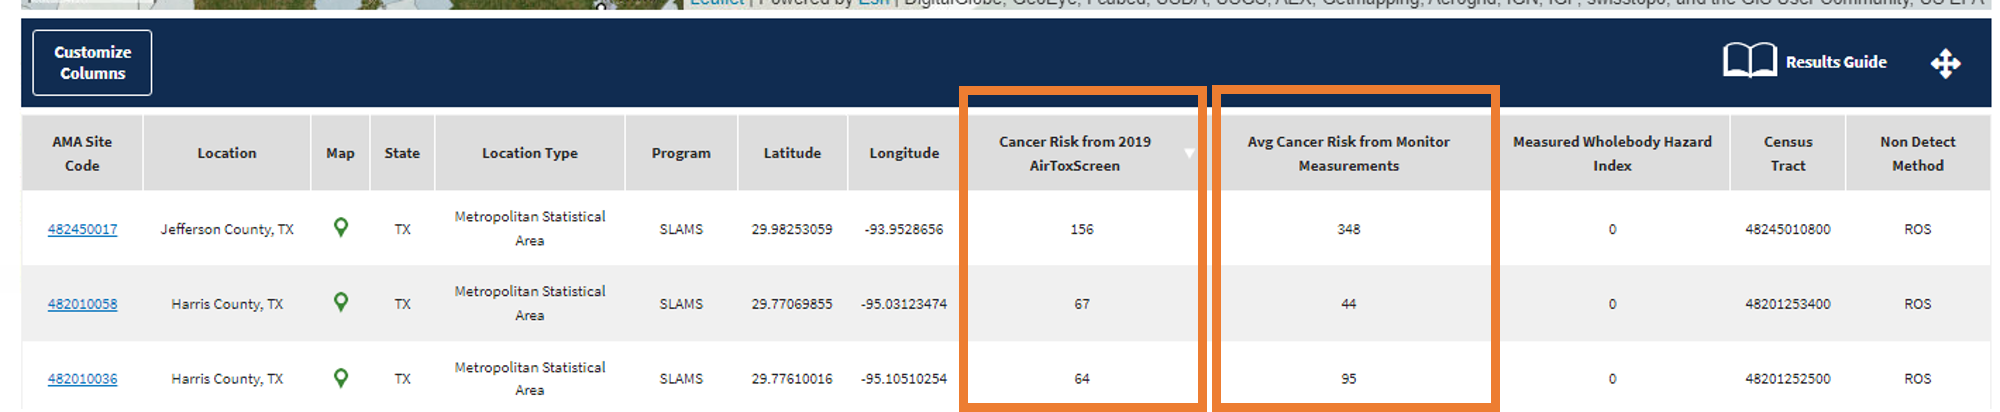 'Cancer Risk from 2019 AirToxScreen' and 'Avg Cancer Risk from Monitor Measurements' columns highlighted on the search results data table